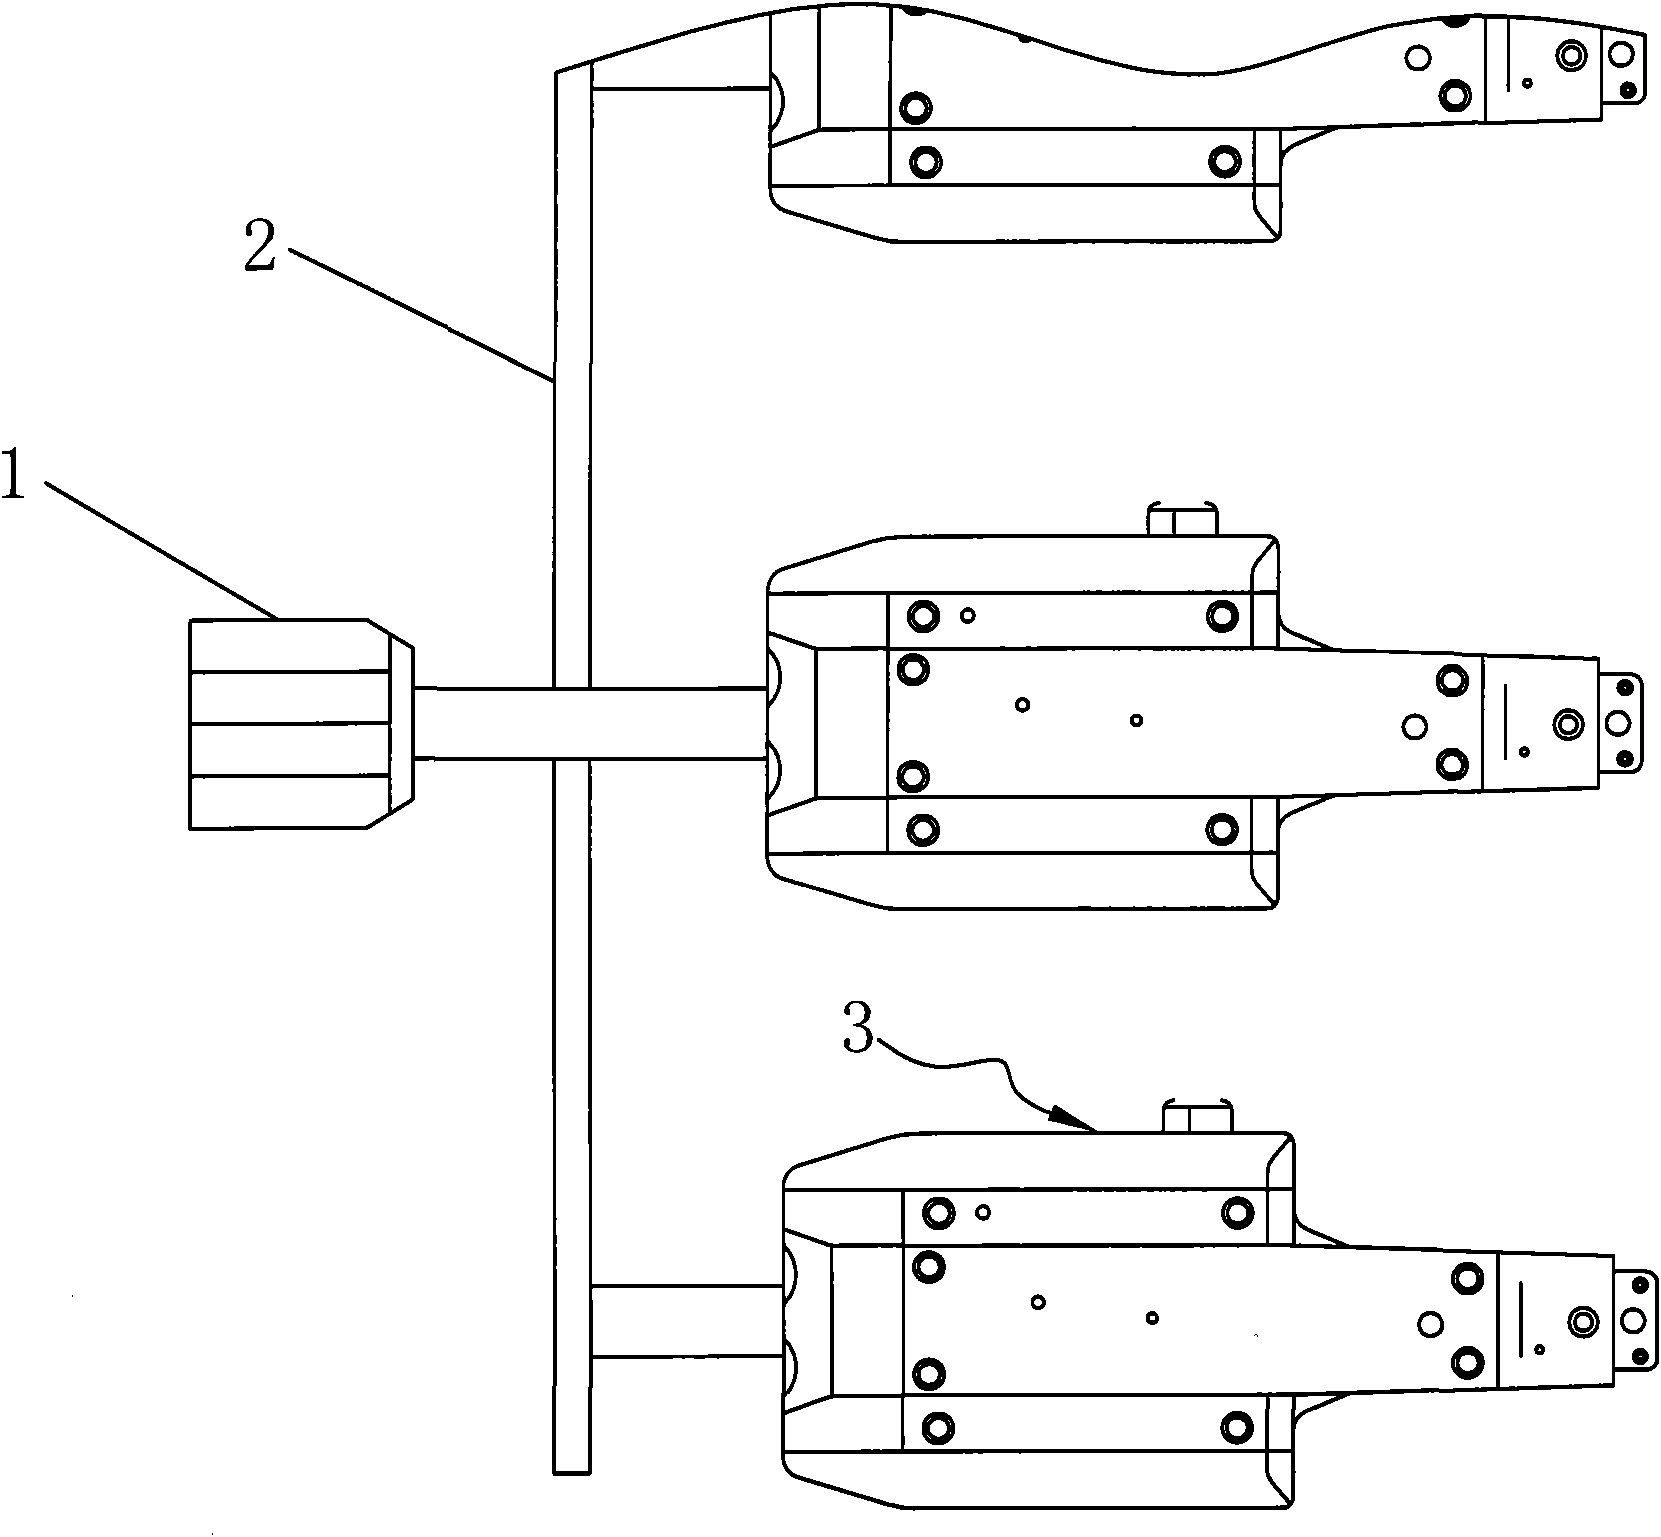 Device for controlling button sewing machine